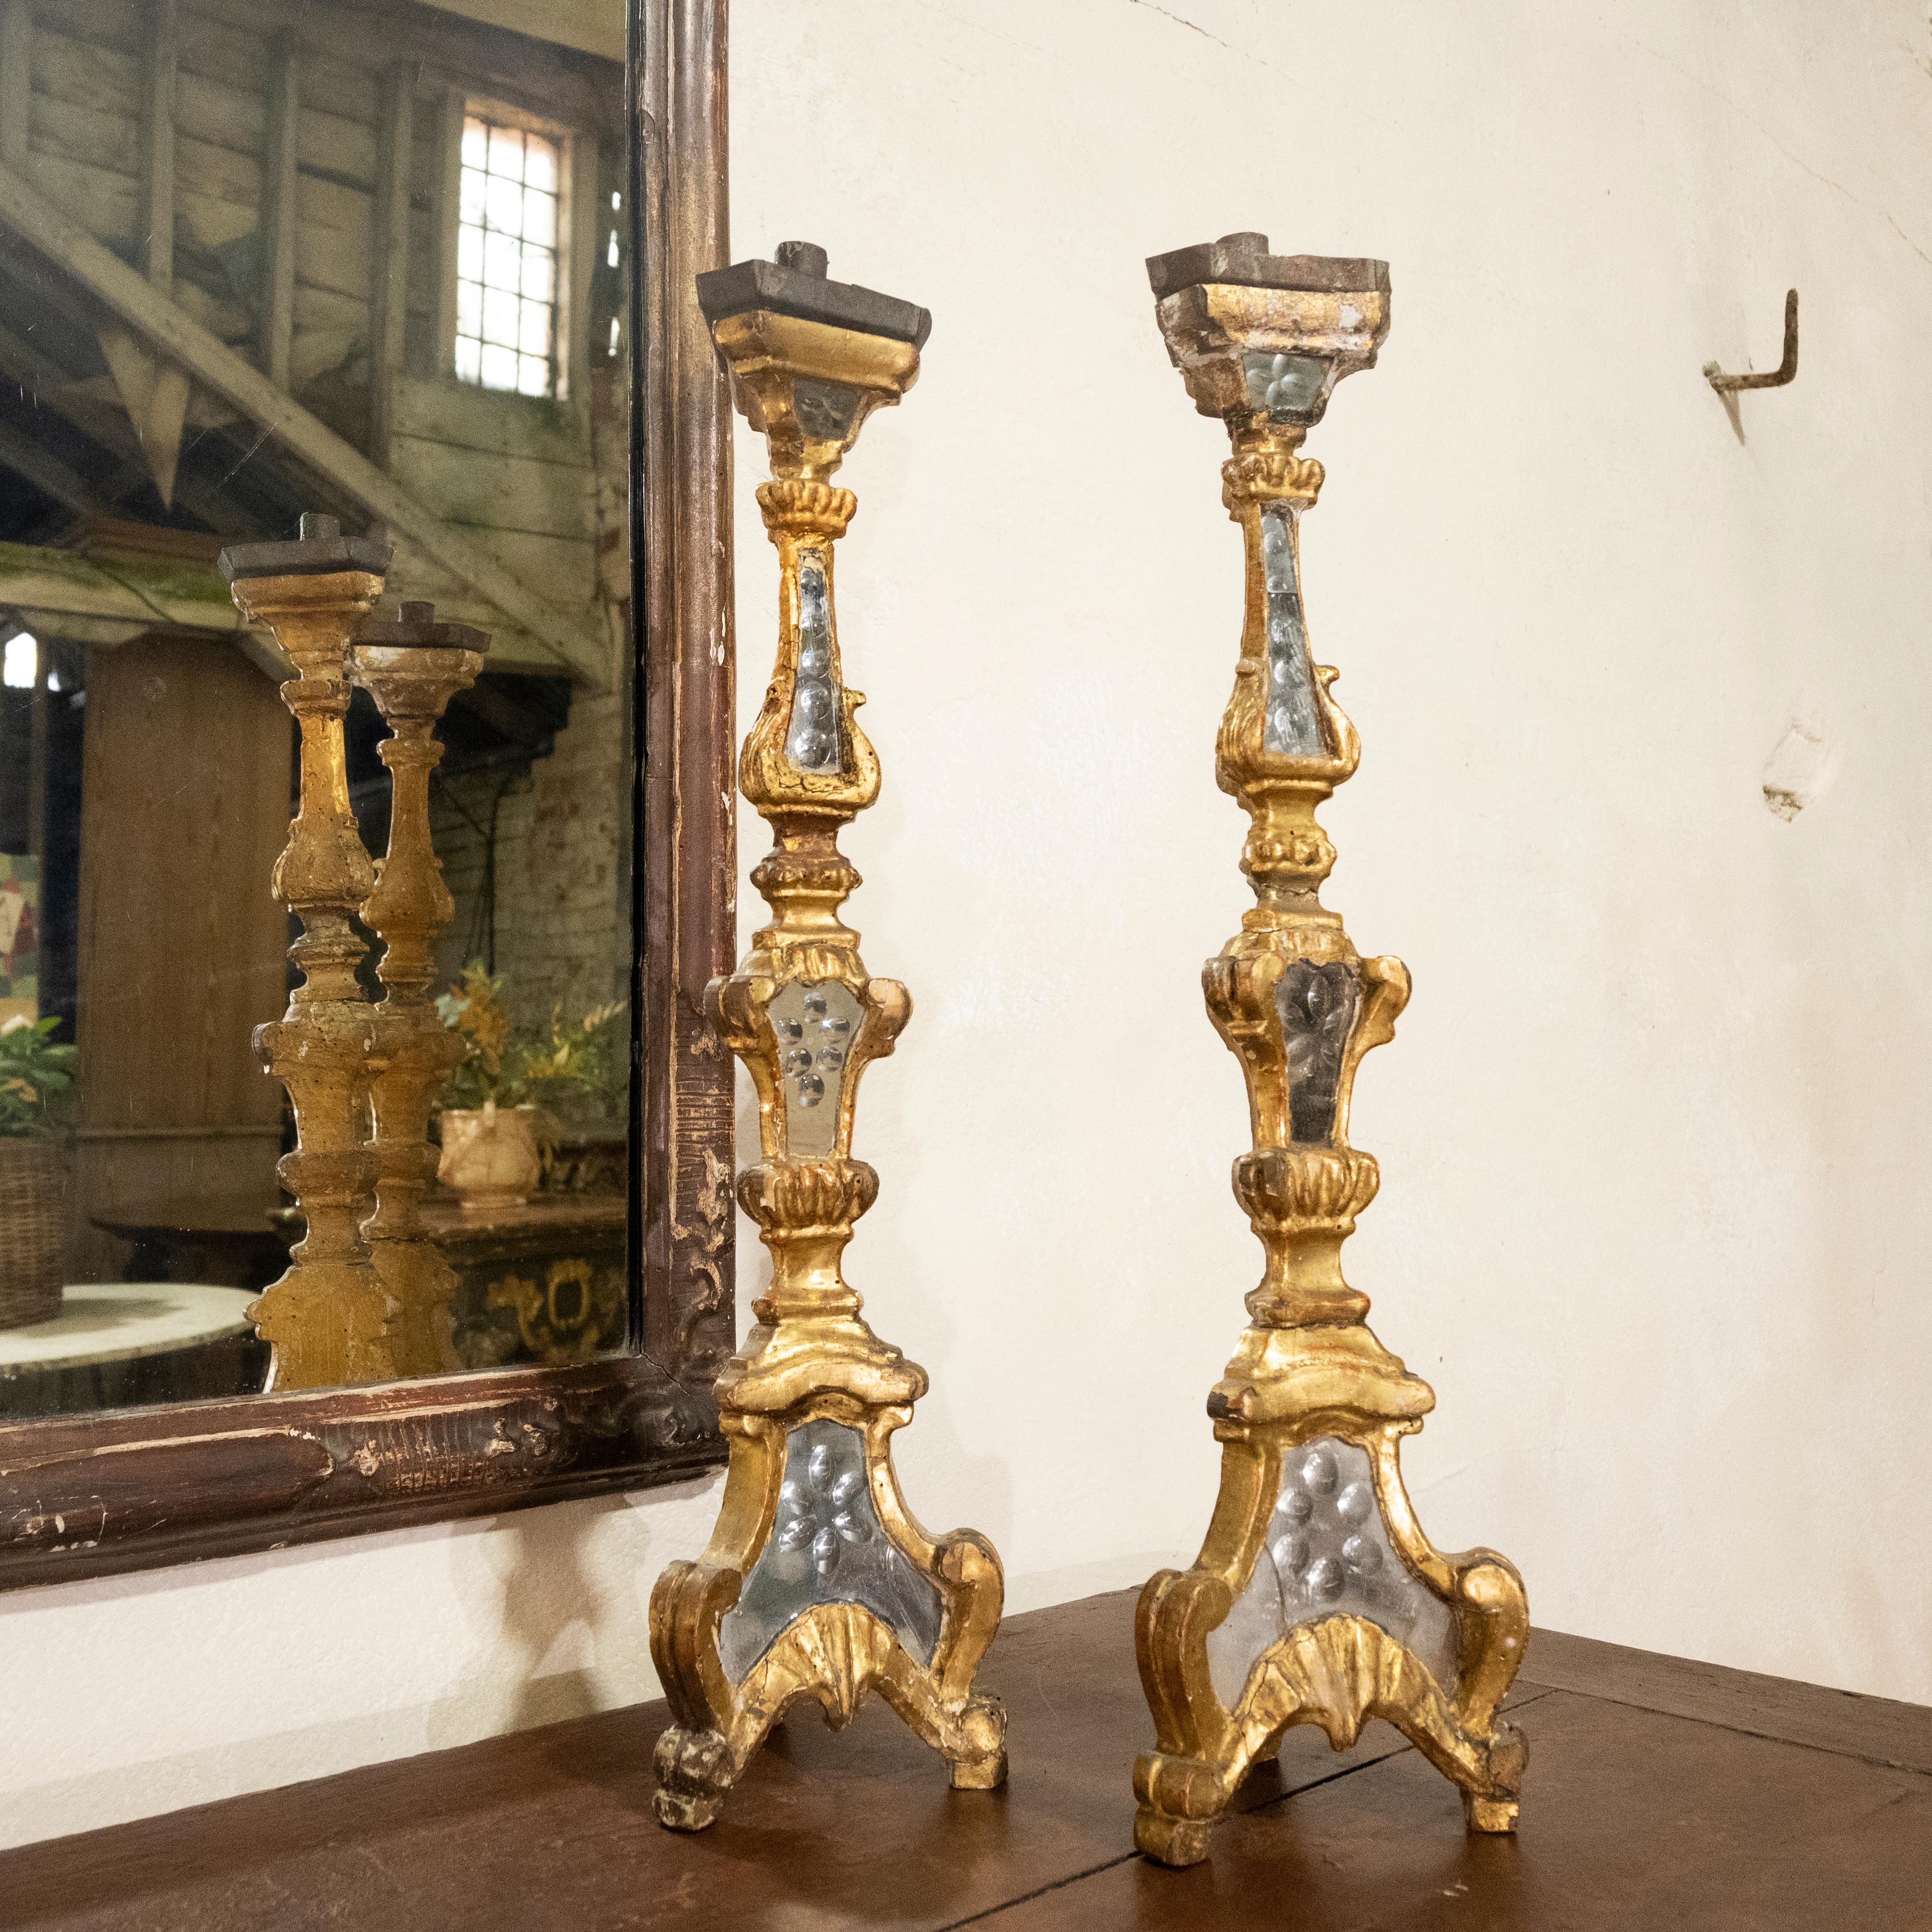 An exceptional pair of early 18th-century gilded and mirrored etched glass Venetian altar - candlesticks. Of triangular form, demonstrating insets of original etched mirror glass to reflect light, a fabulous addition to this elegant design.